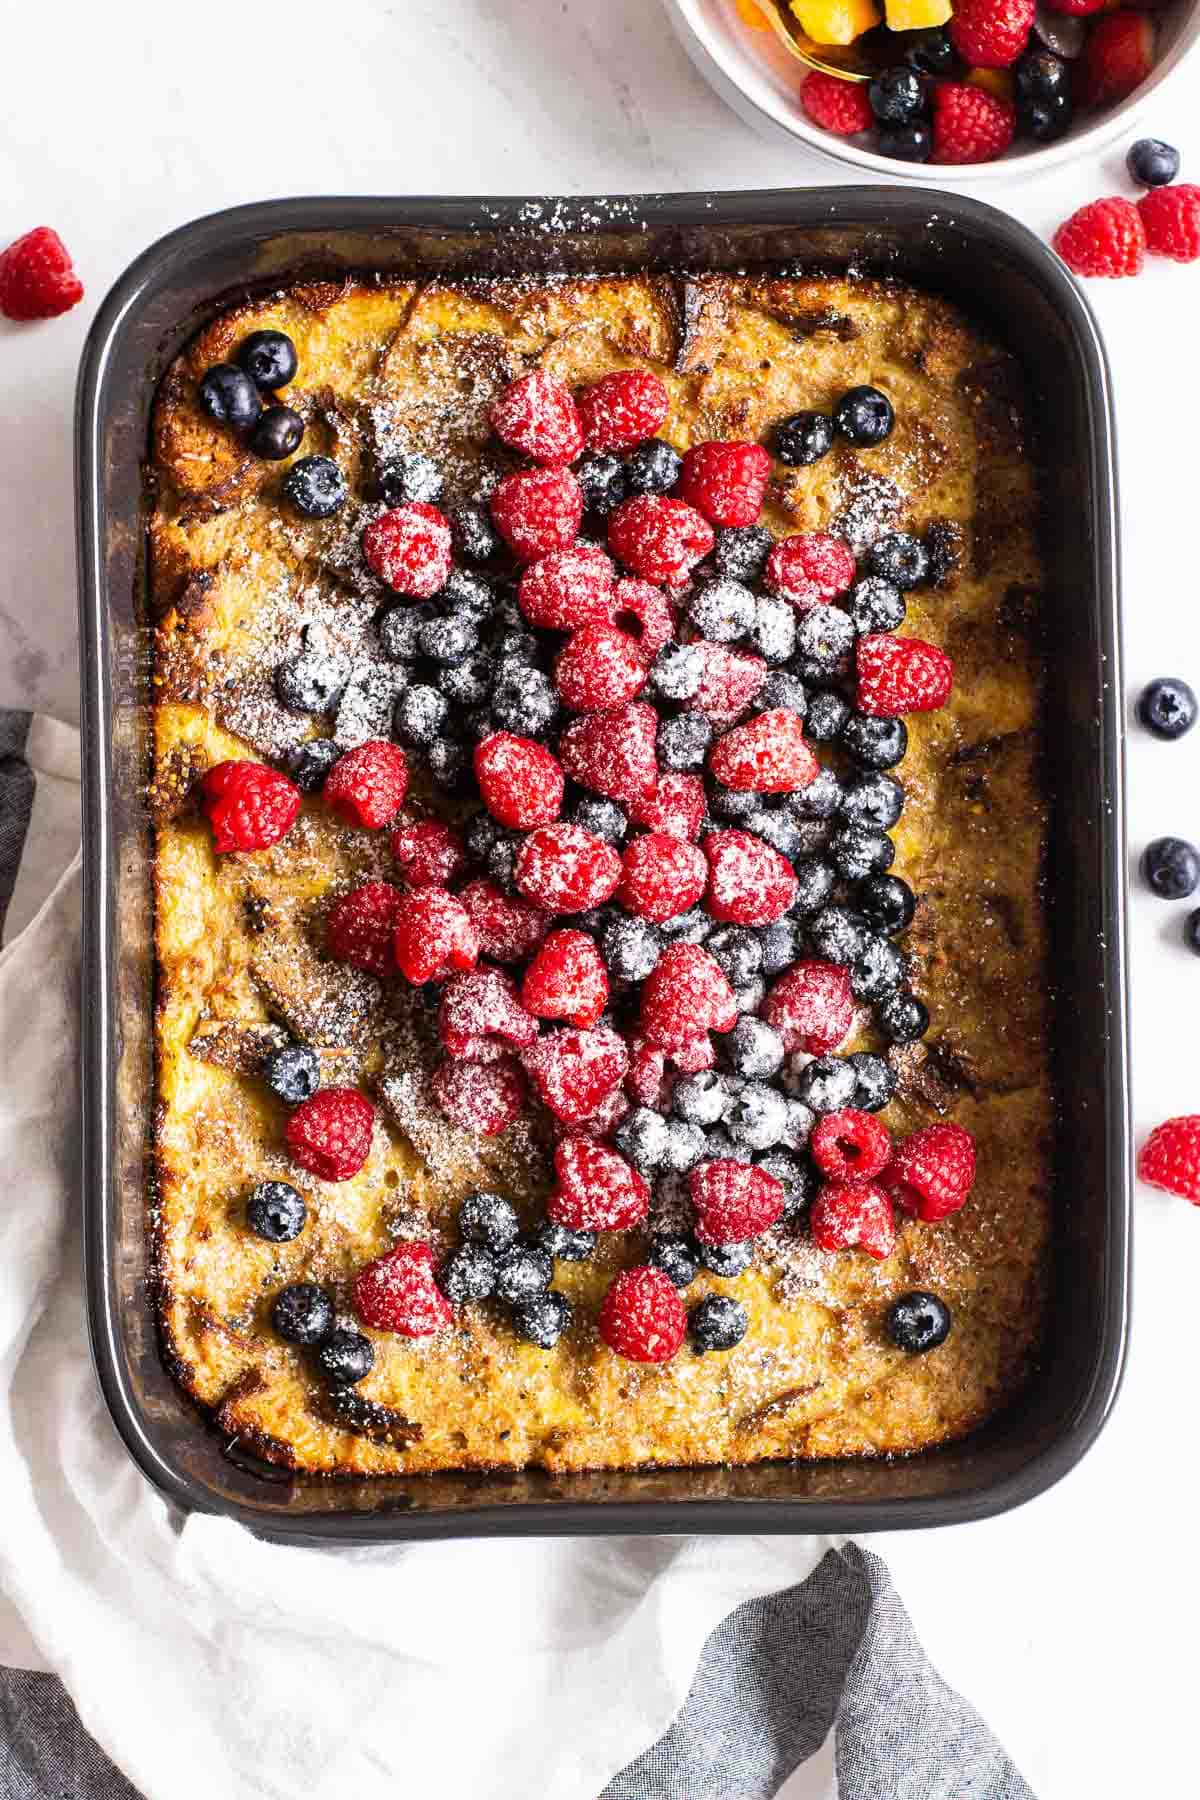 Healthy French Toast Casserole with Berries   iFOODreal.com